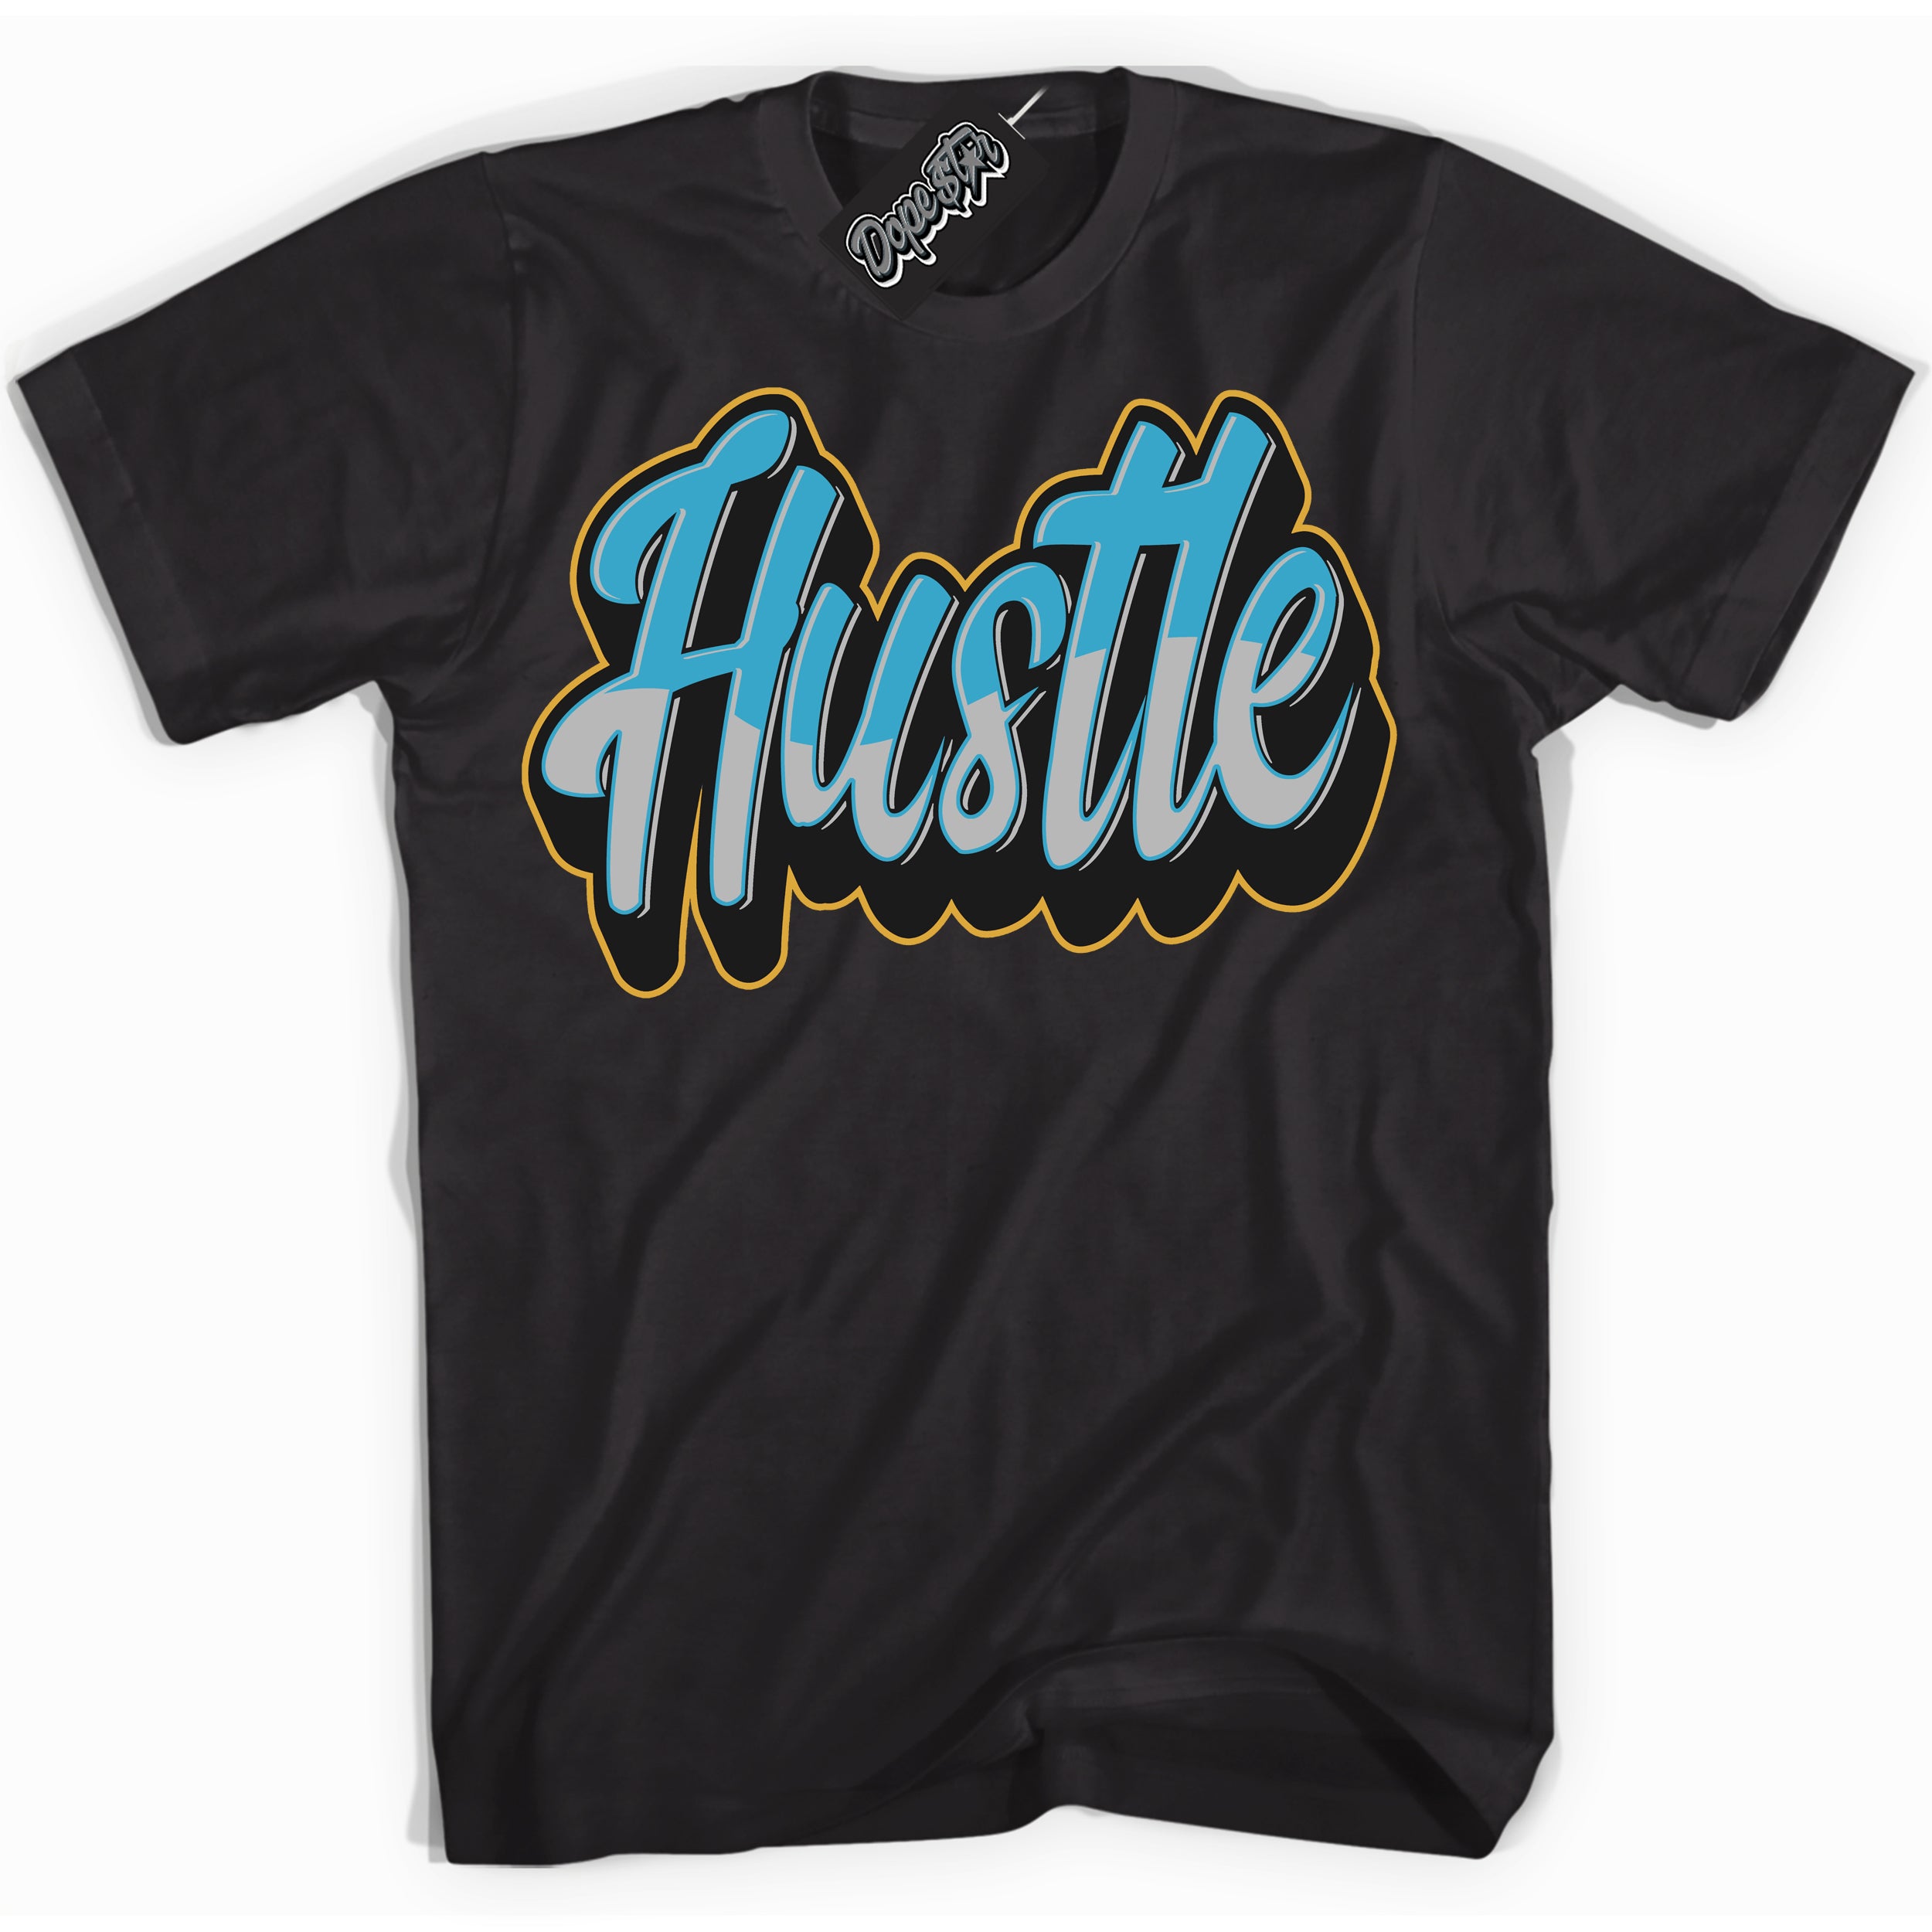 Cool Black Shirt with “ Hustle” design that perfectly matches Aqua 5s Sneakers.